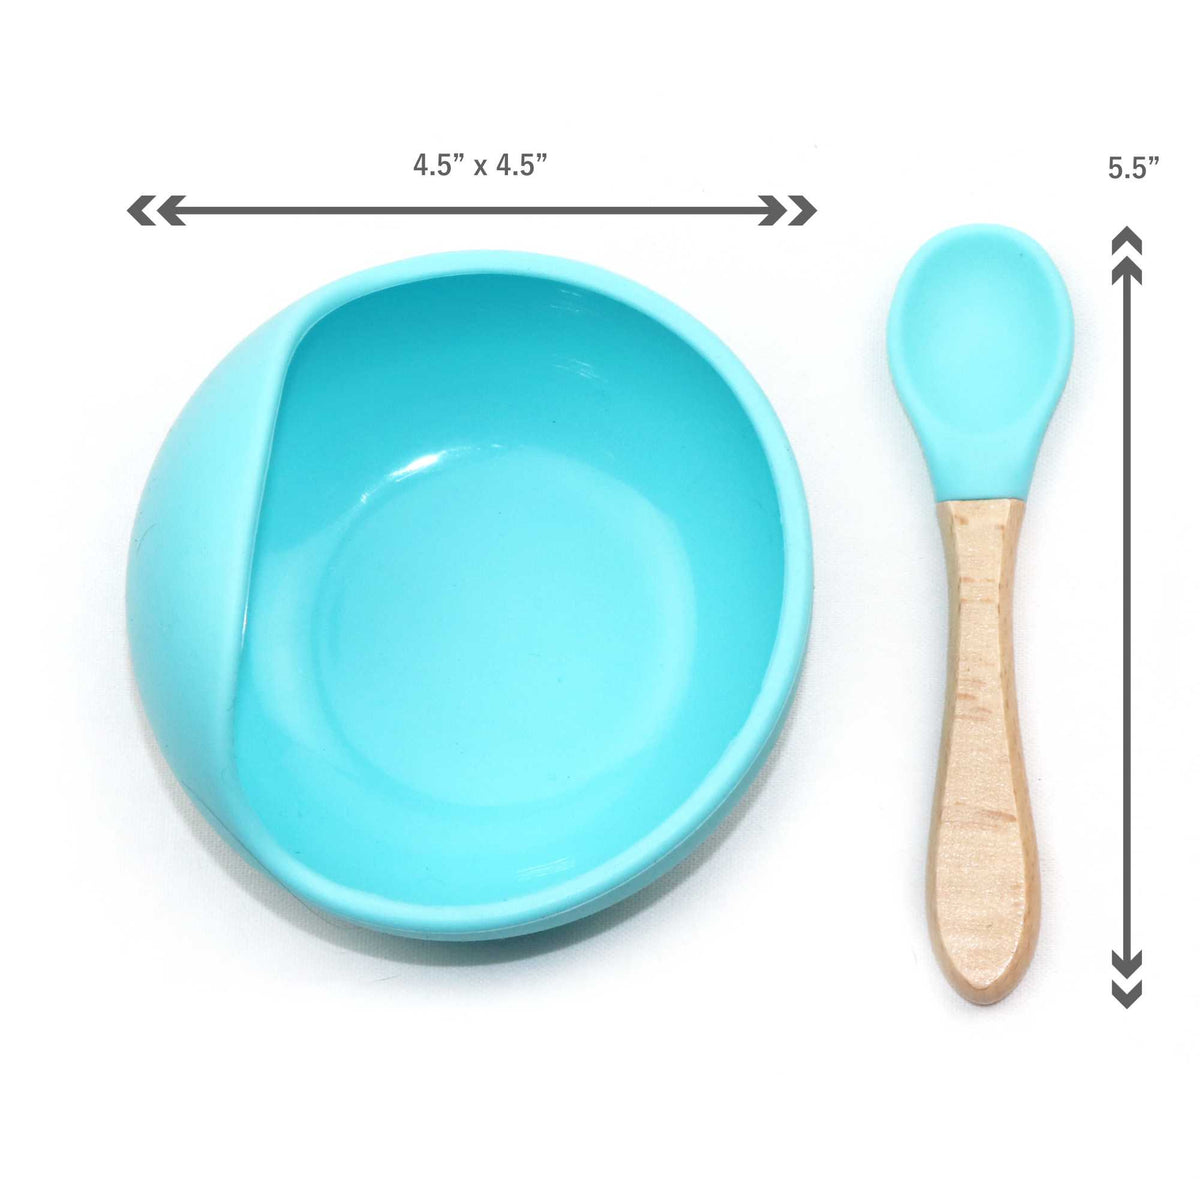 Magic Stay-put Baby Bowl & Spoon Set in Charming Teal – Ever After Baby